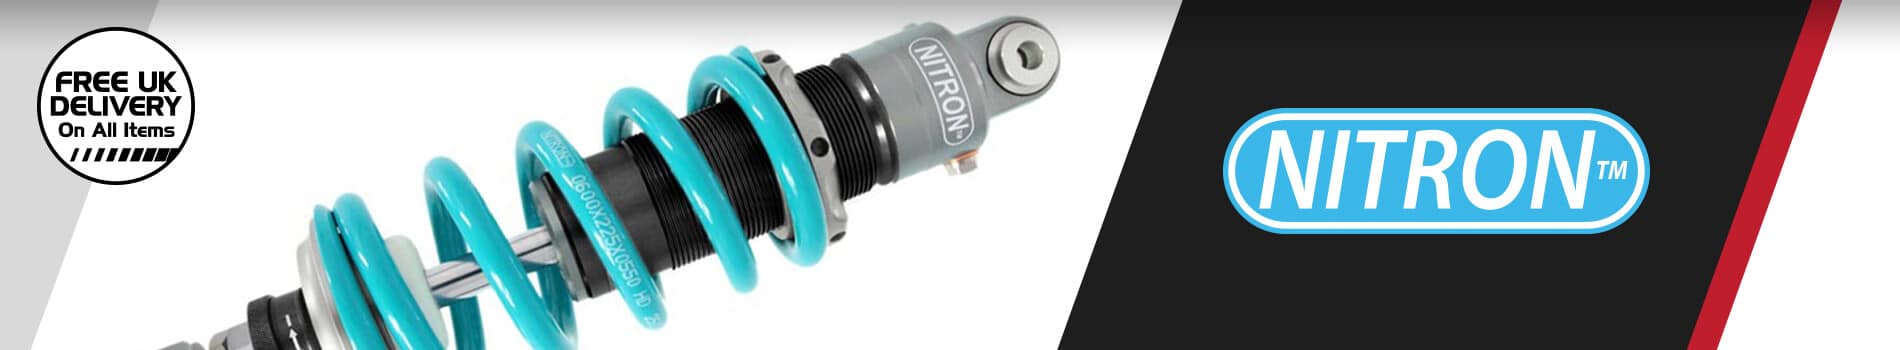 Nitron R1 Shock - Free UK Delivery